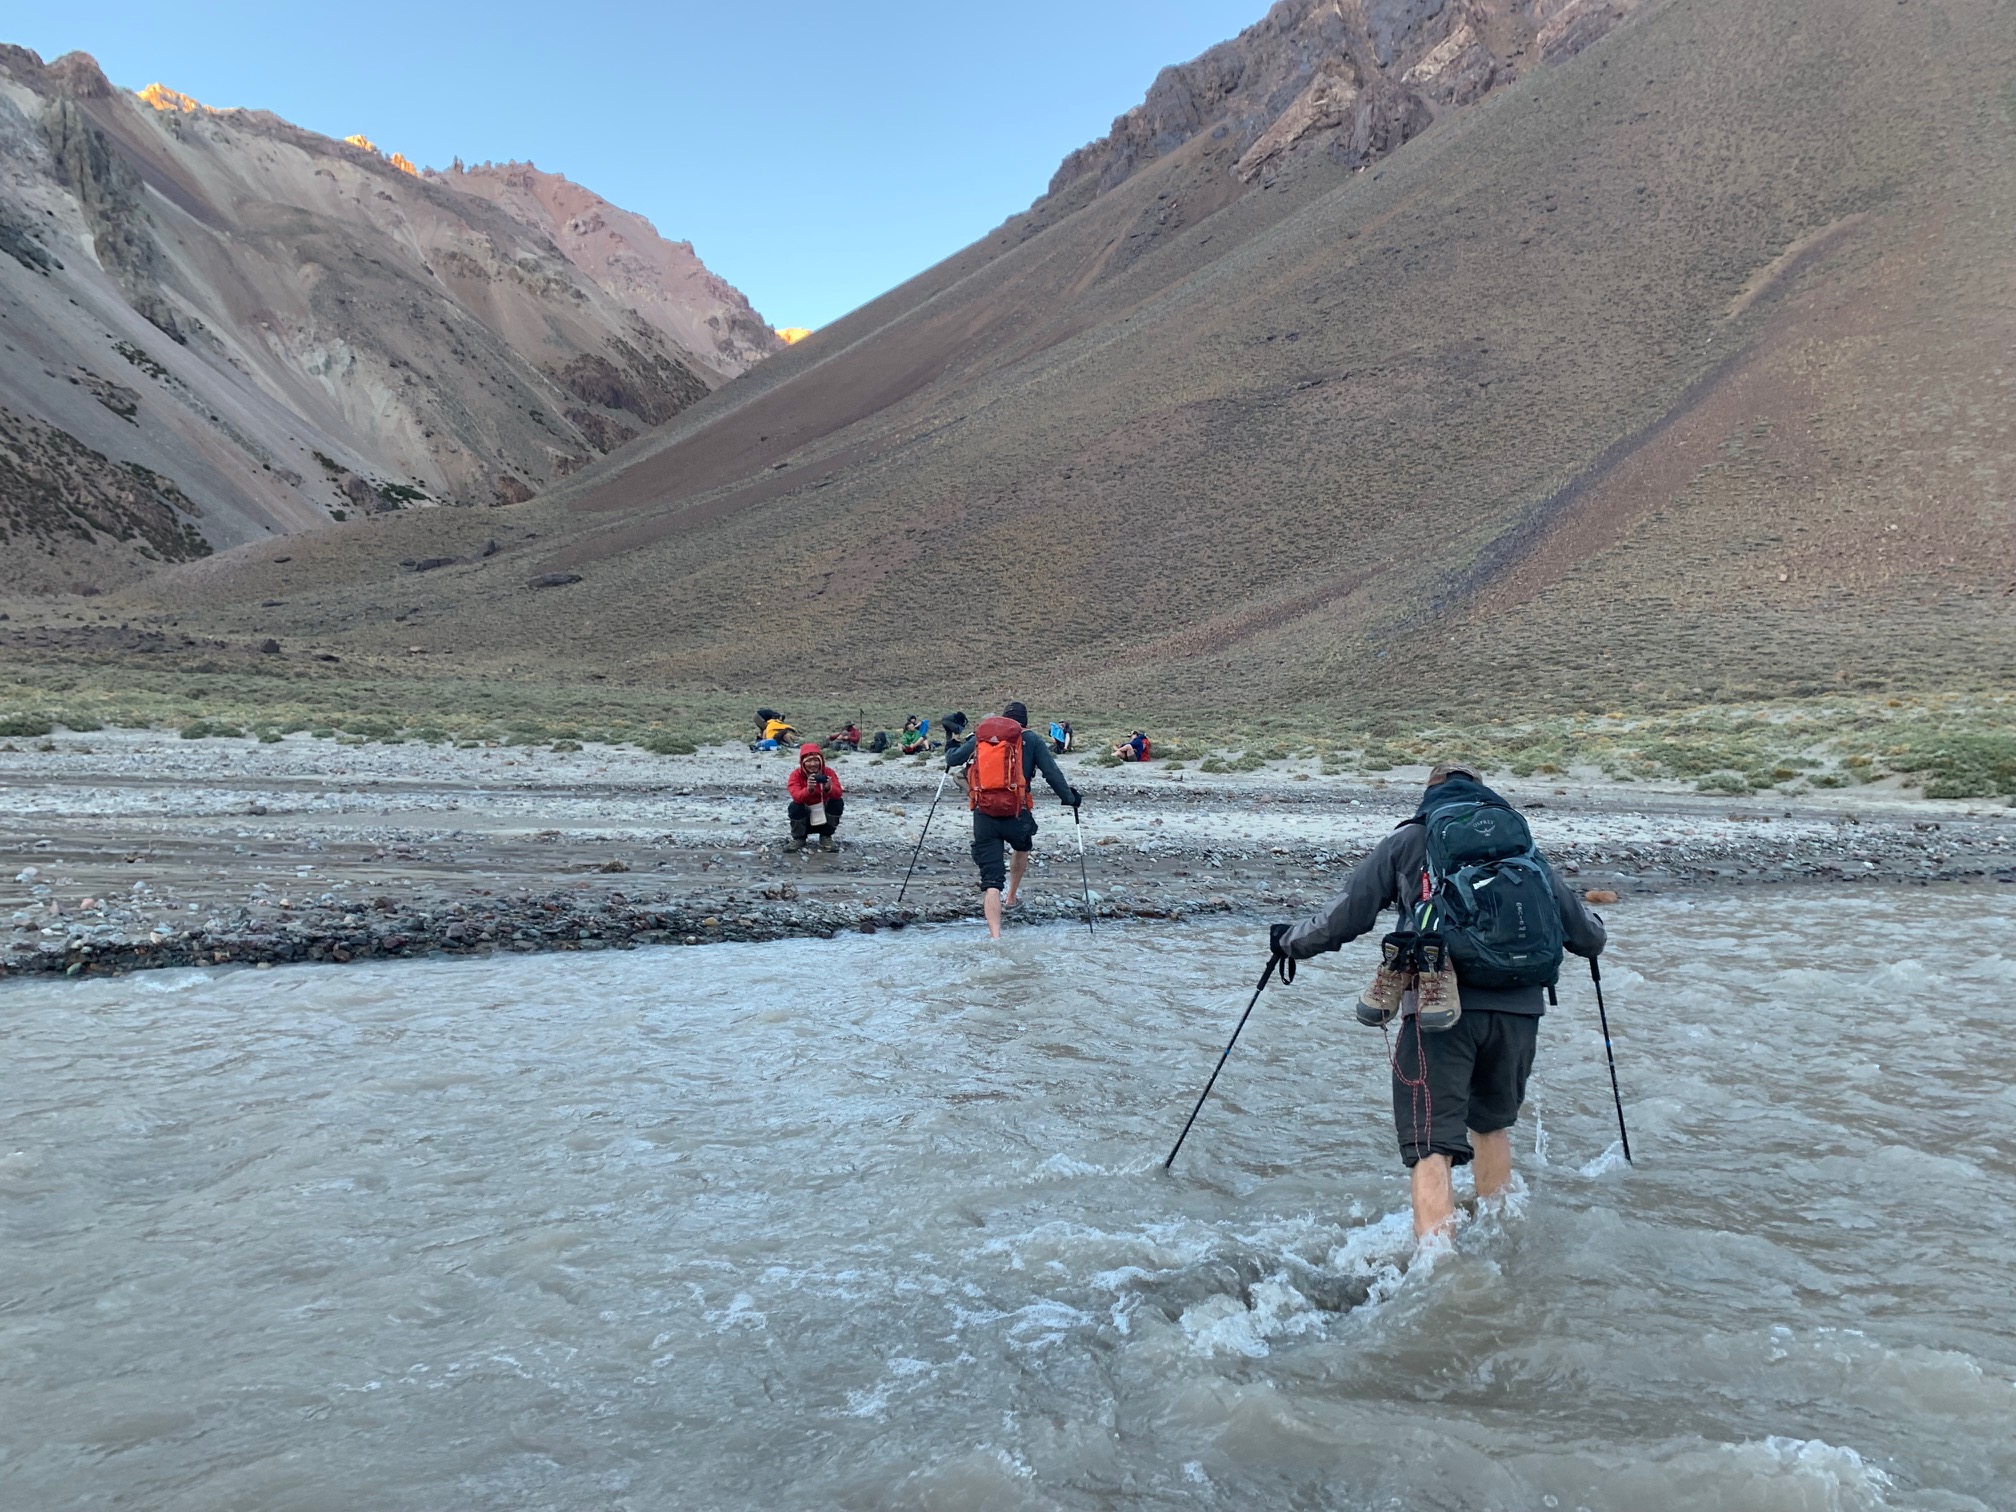 River crossing as we head to Aconcagua Base Camp.